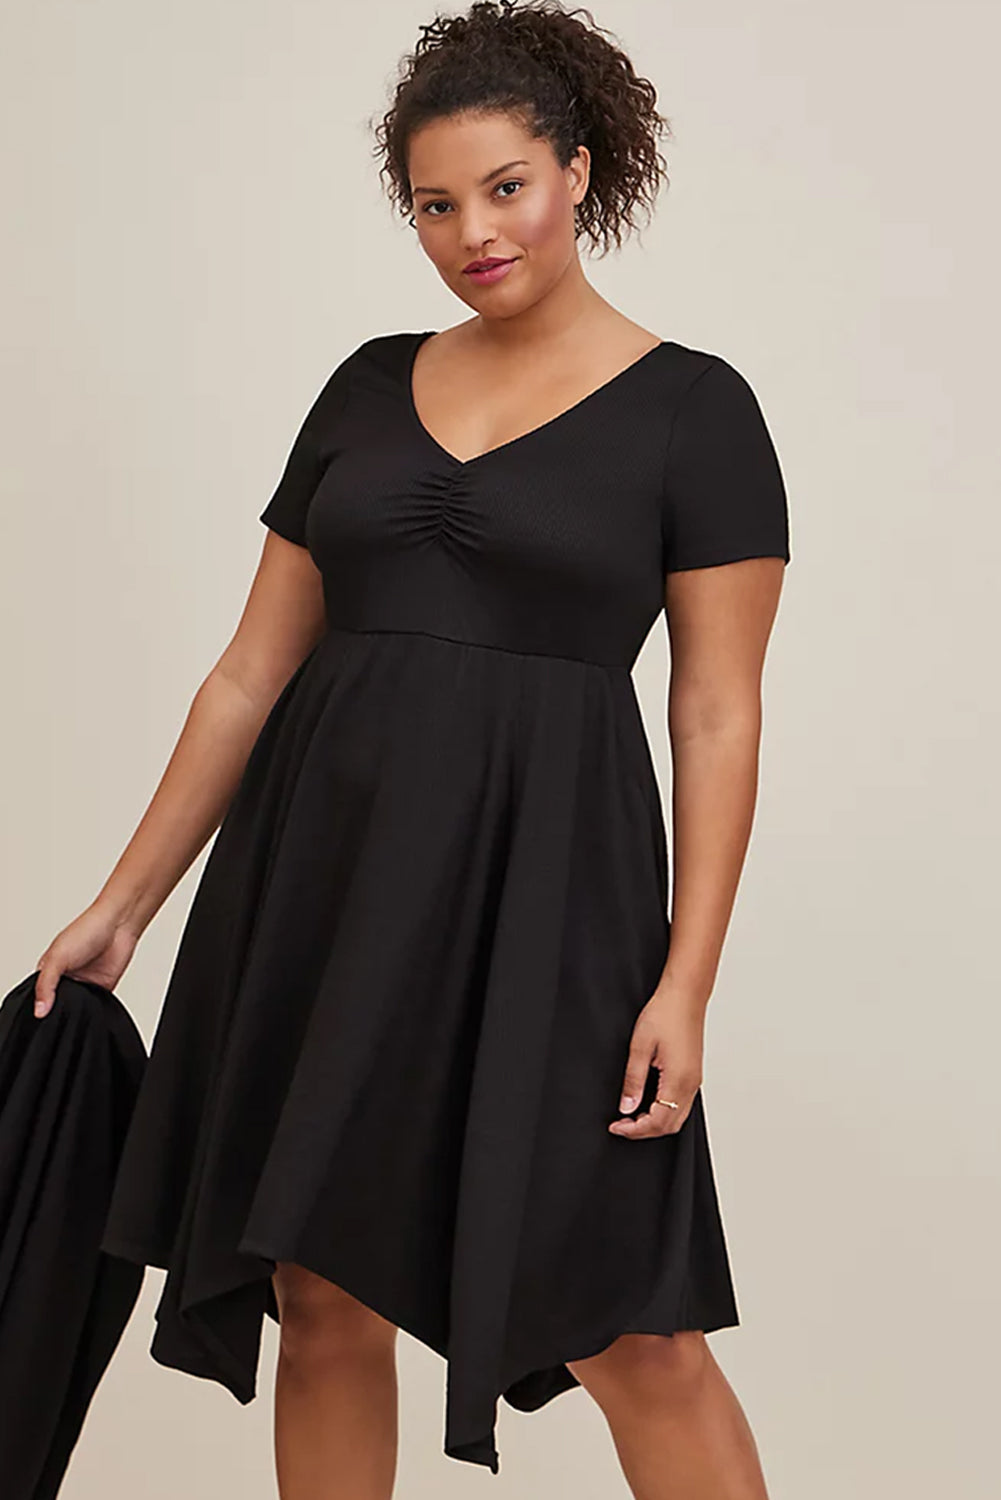 Black Plus Size Ruched Sweetheart Fit and Flare Midi Dress Plus Size Dresses JT's Designer Fashion